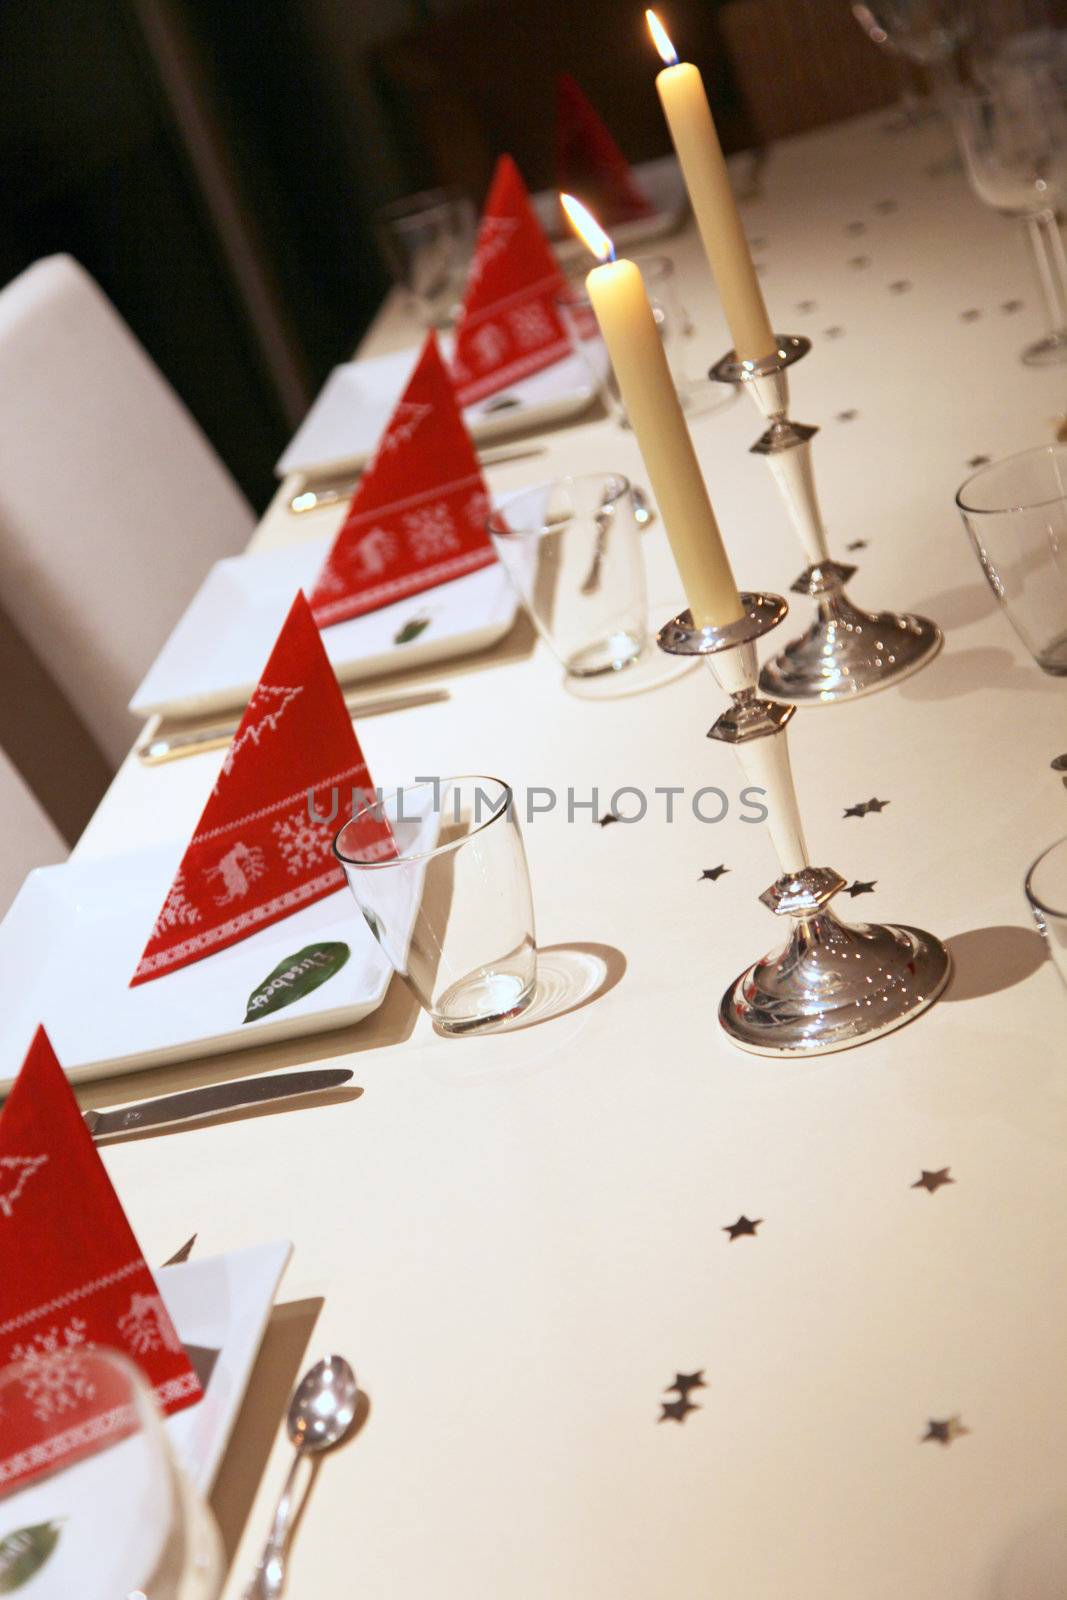 Christmas table decoration with stars and candles
